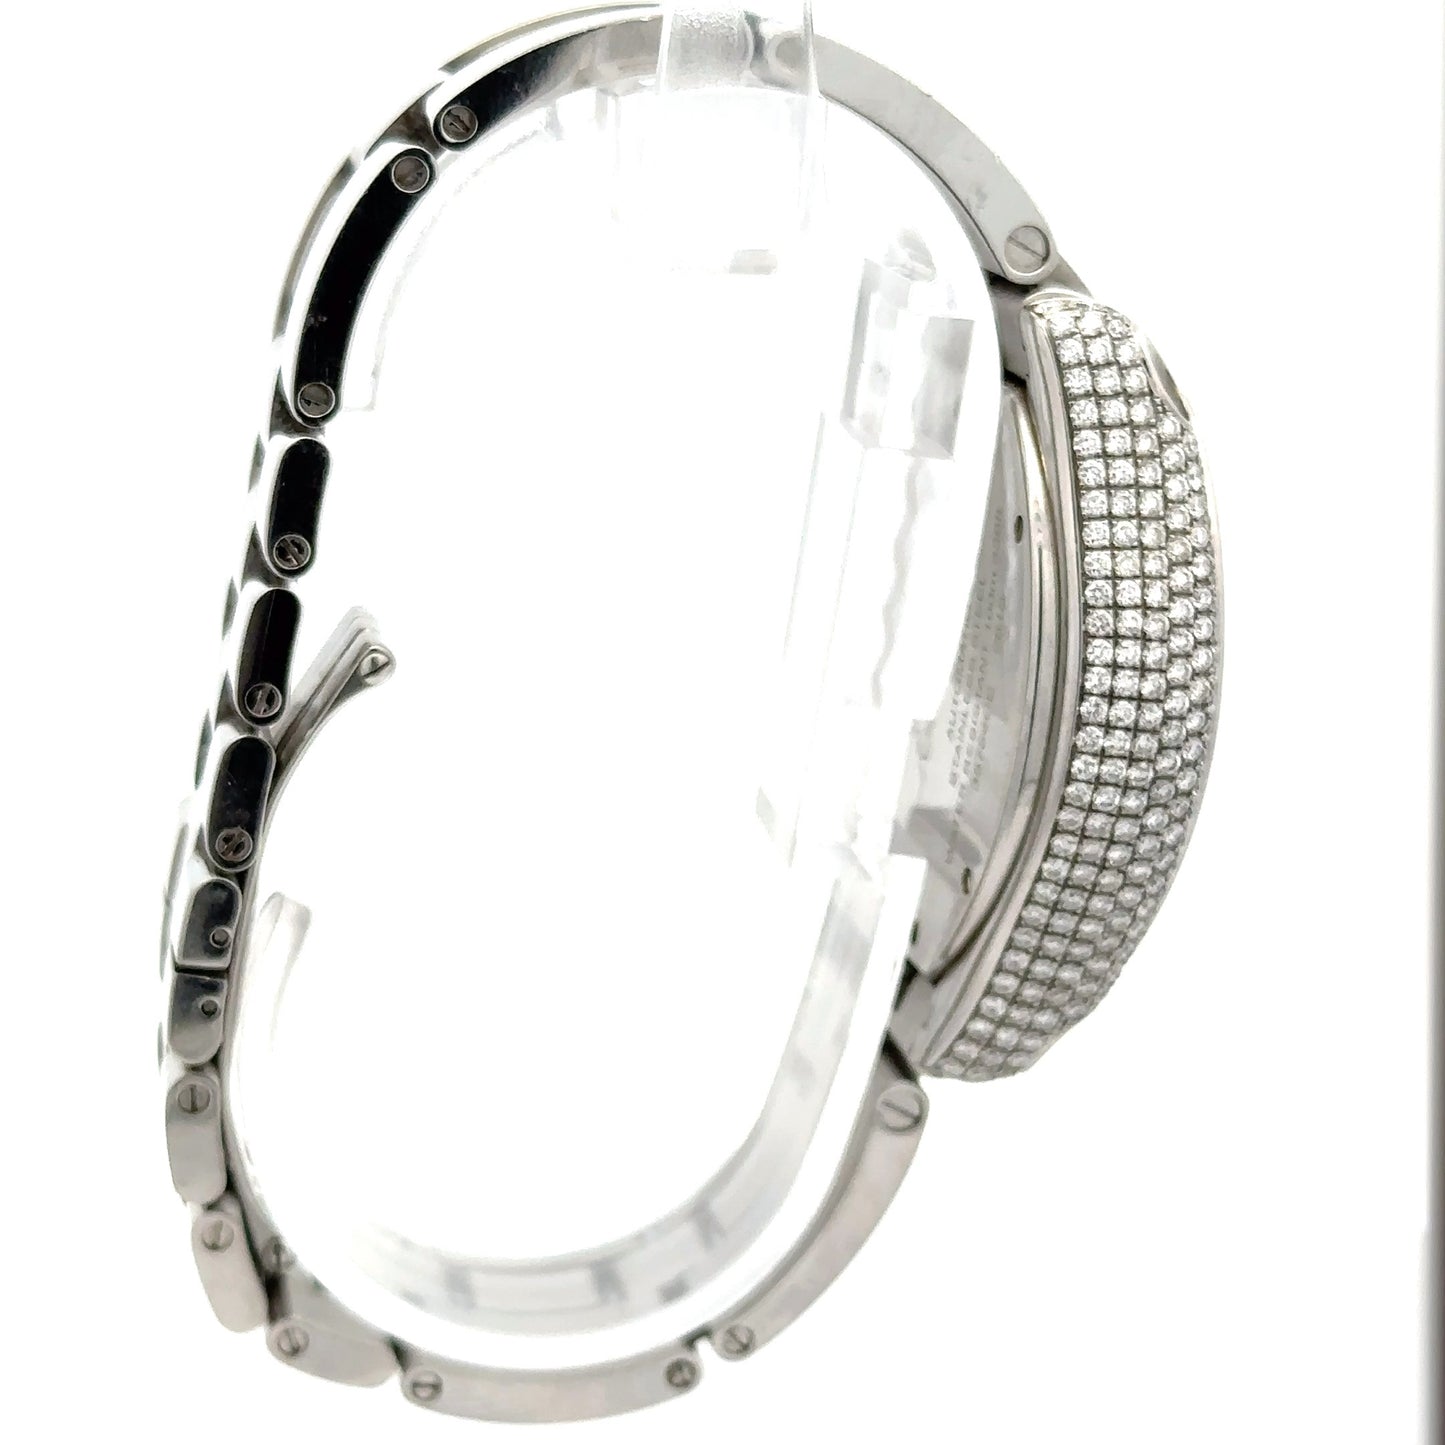 The side of the Cartier watch. Diamonds on the side of the face. Scratches shown on the band.